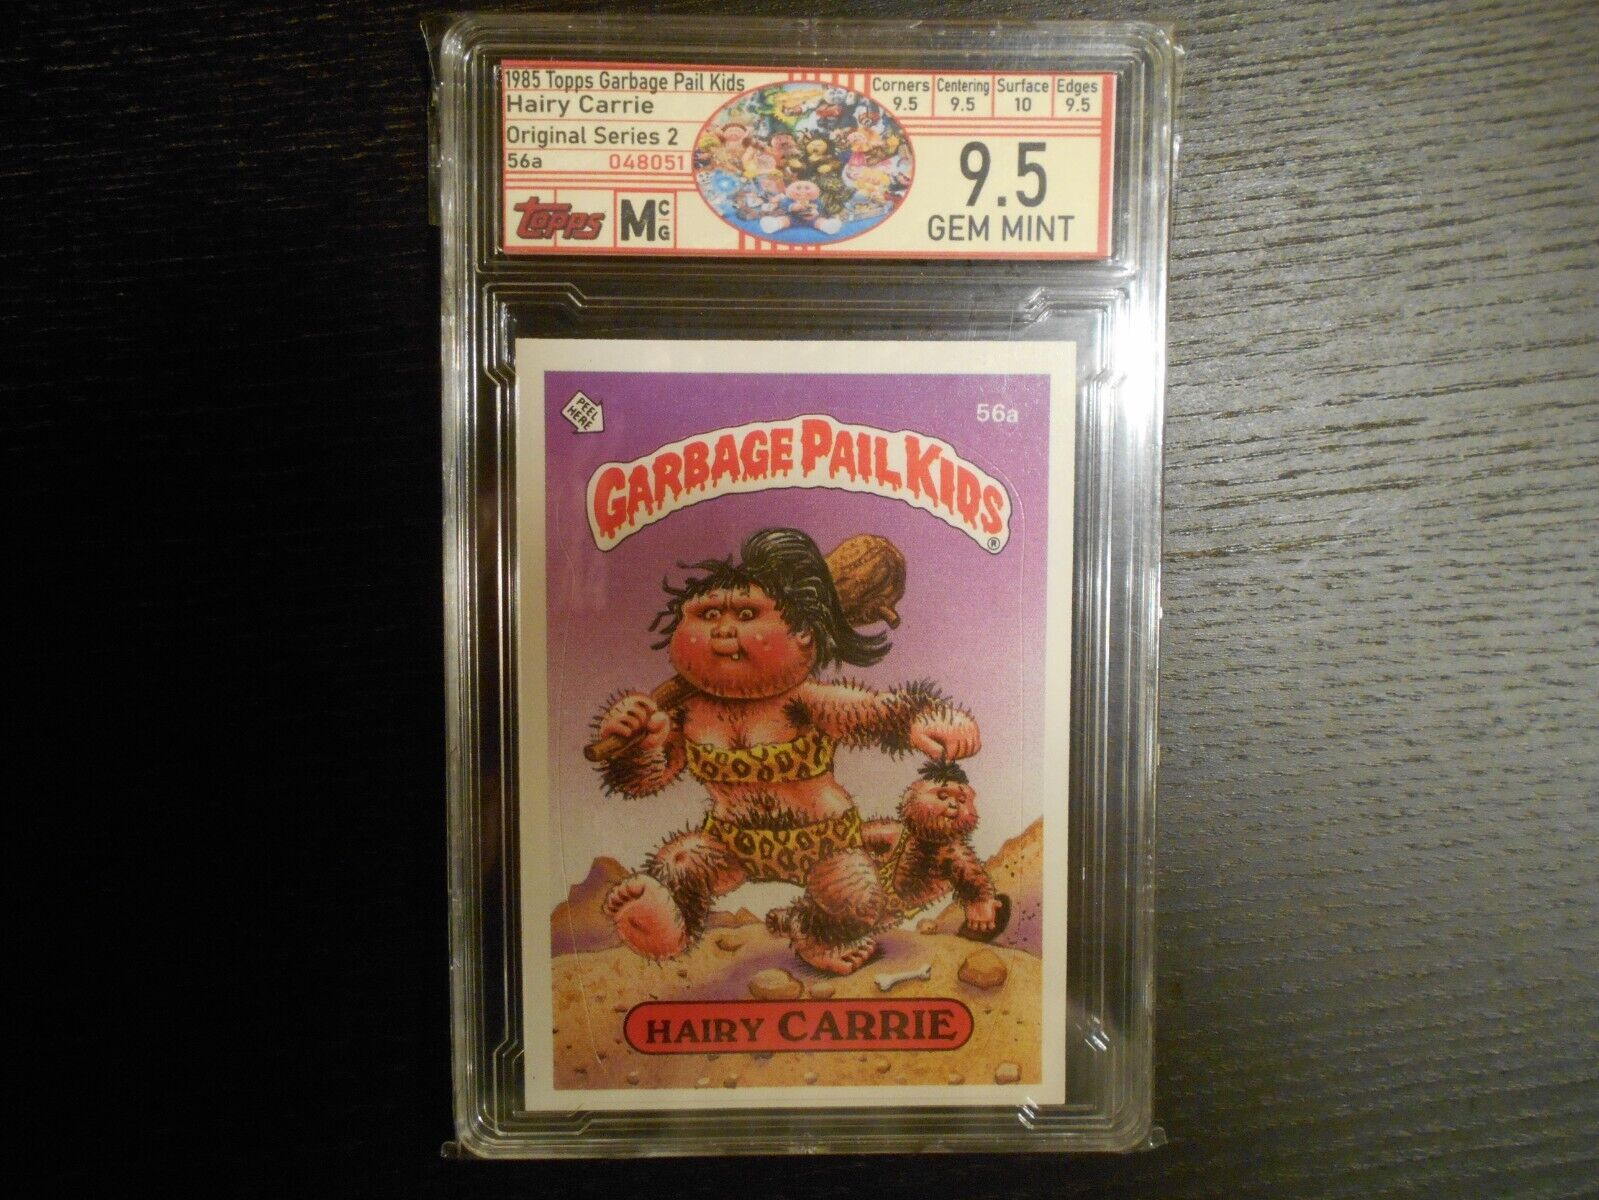 1985 Topps GARBAGE PAIL KIDS S2 #56a Hairy Carrie MCG 9.5 (PSA/APR $300) GEM 💎